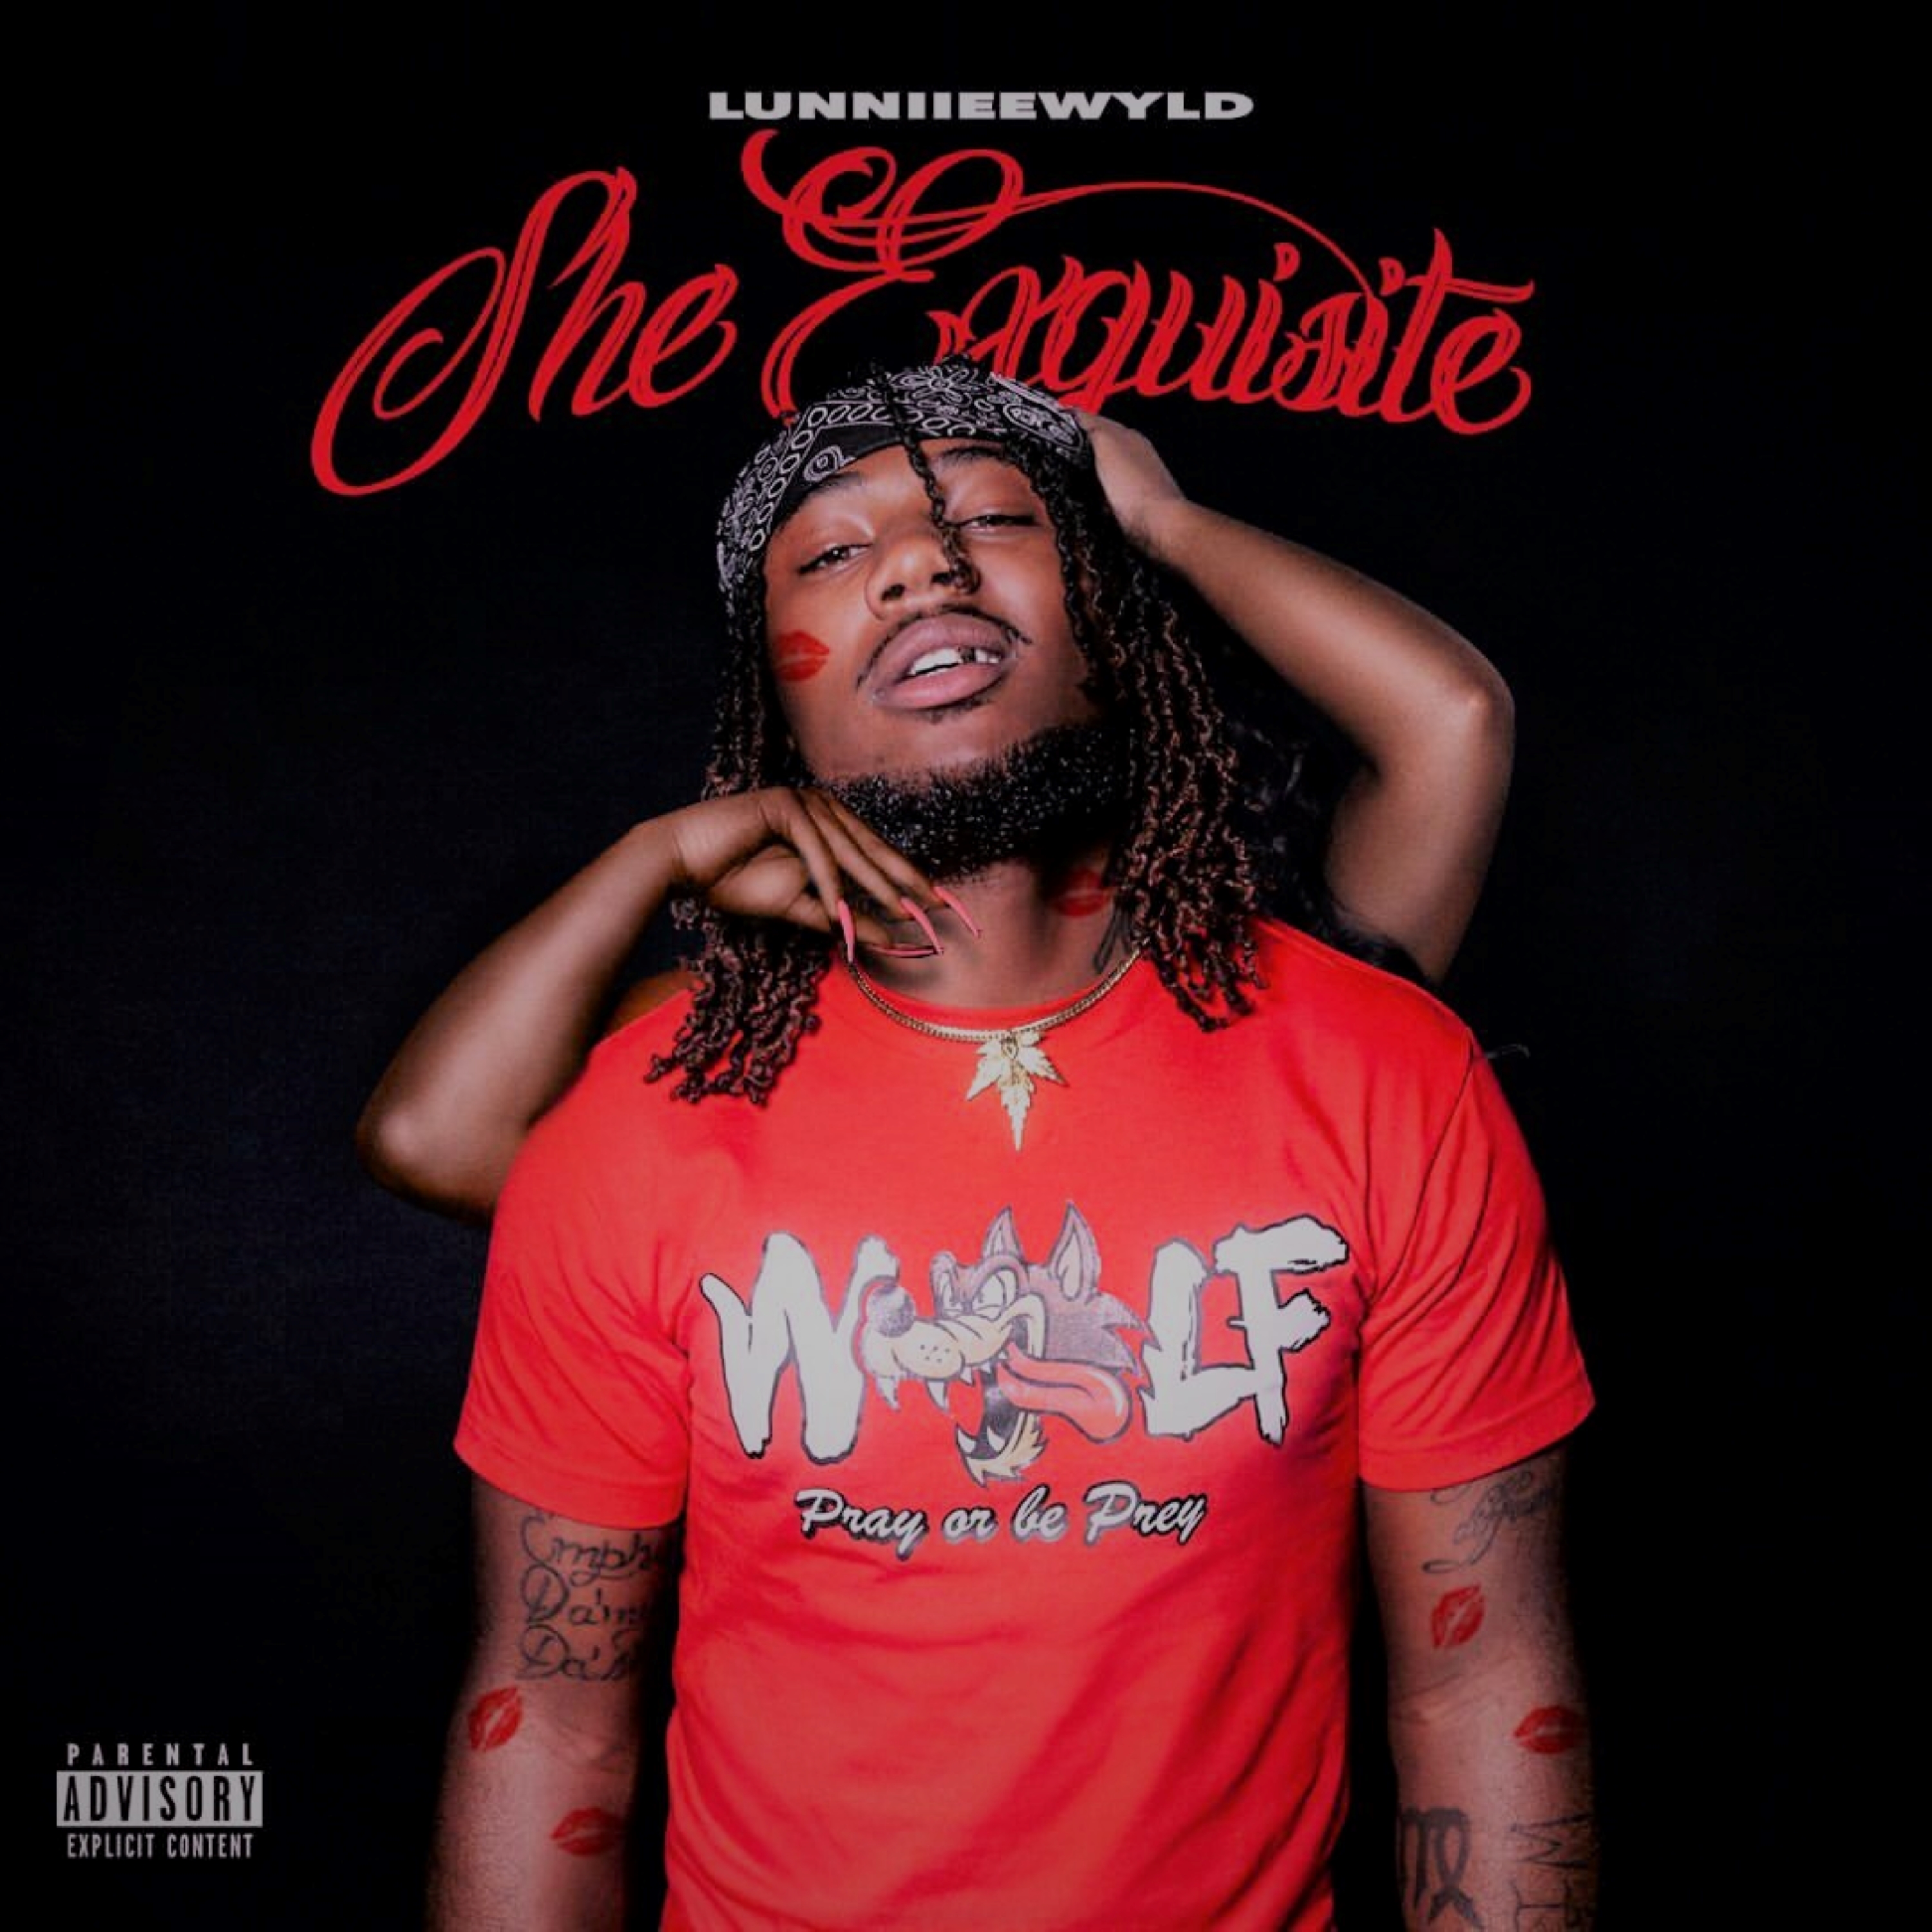 LunniieeWyld unveils his intriguing Anthemic & Uplifting Hip-Hop Single "She Exquisite" as this is capturing the minds of the music lovers